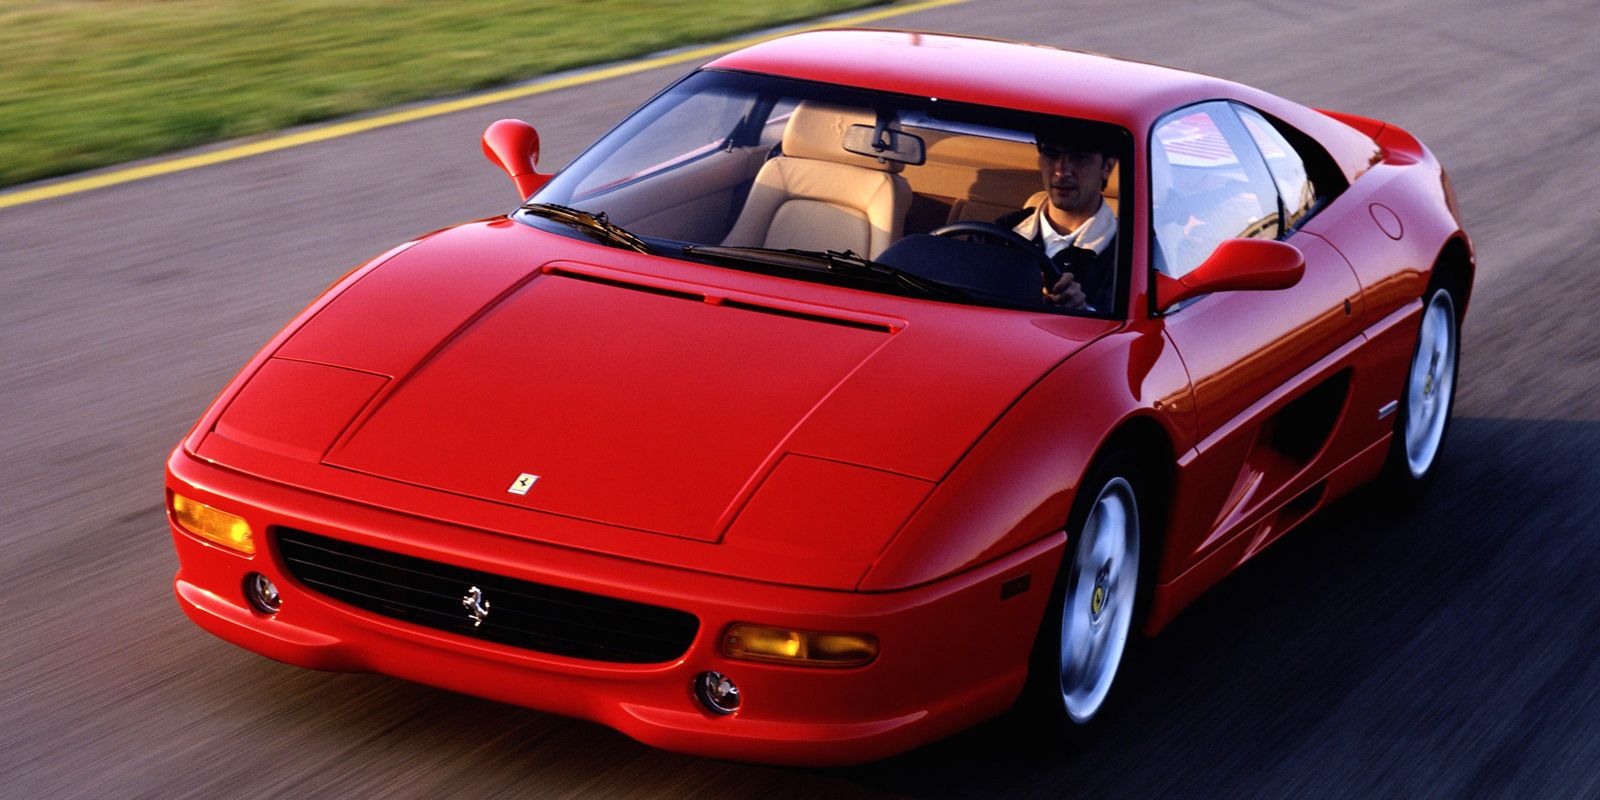 90s Ferrari: Luxury and Speed in the Fast Lane